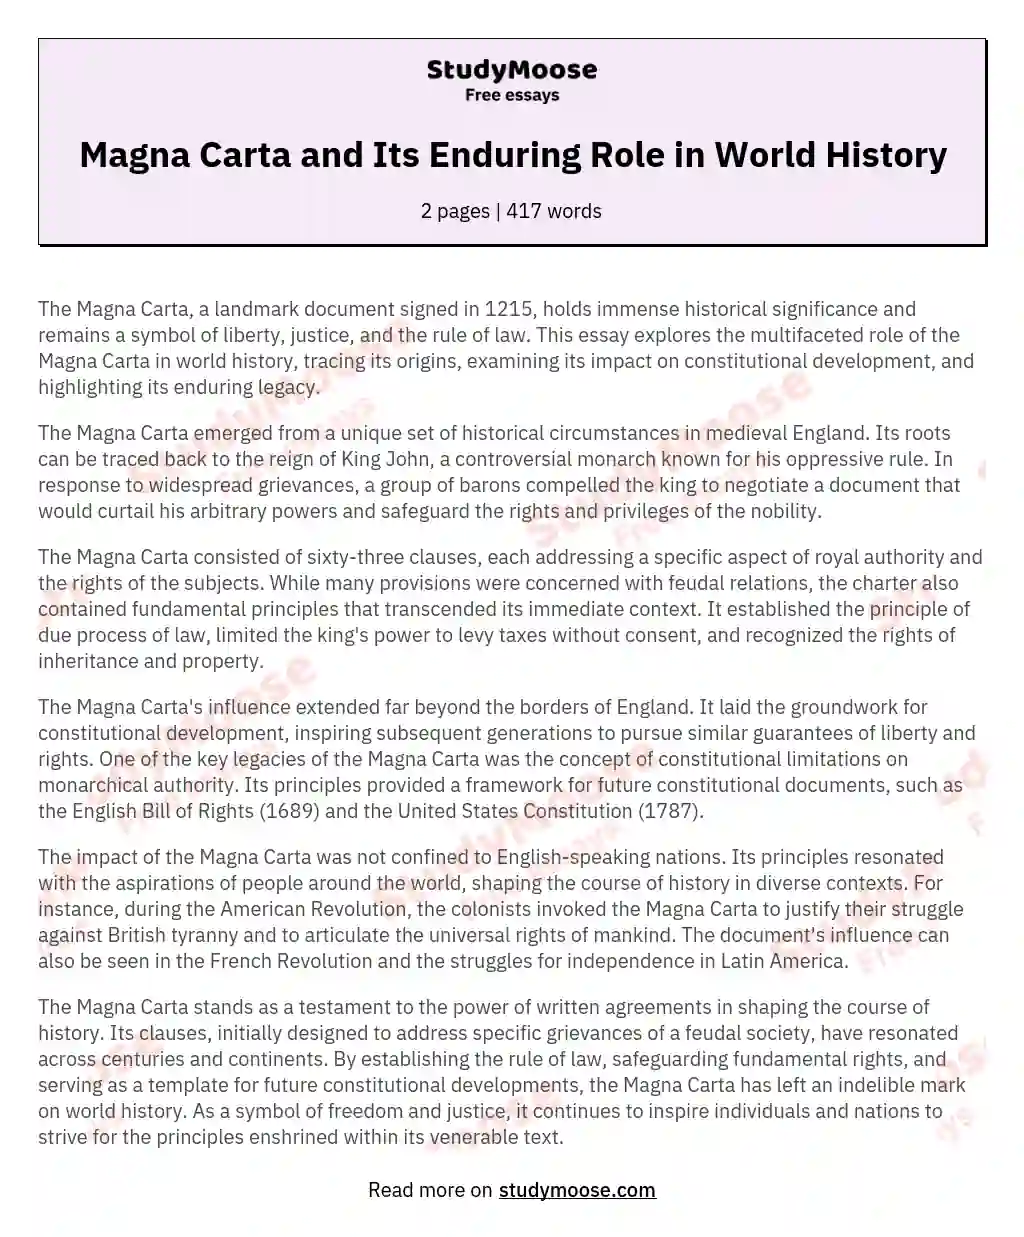 Magna Carta and Its Enduring Role in World History essay